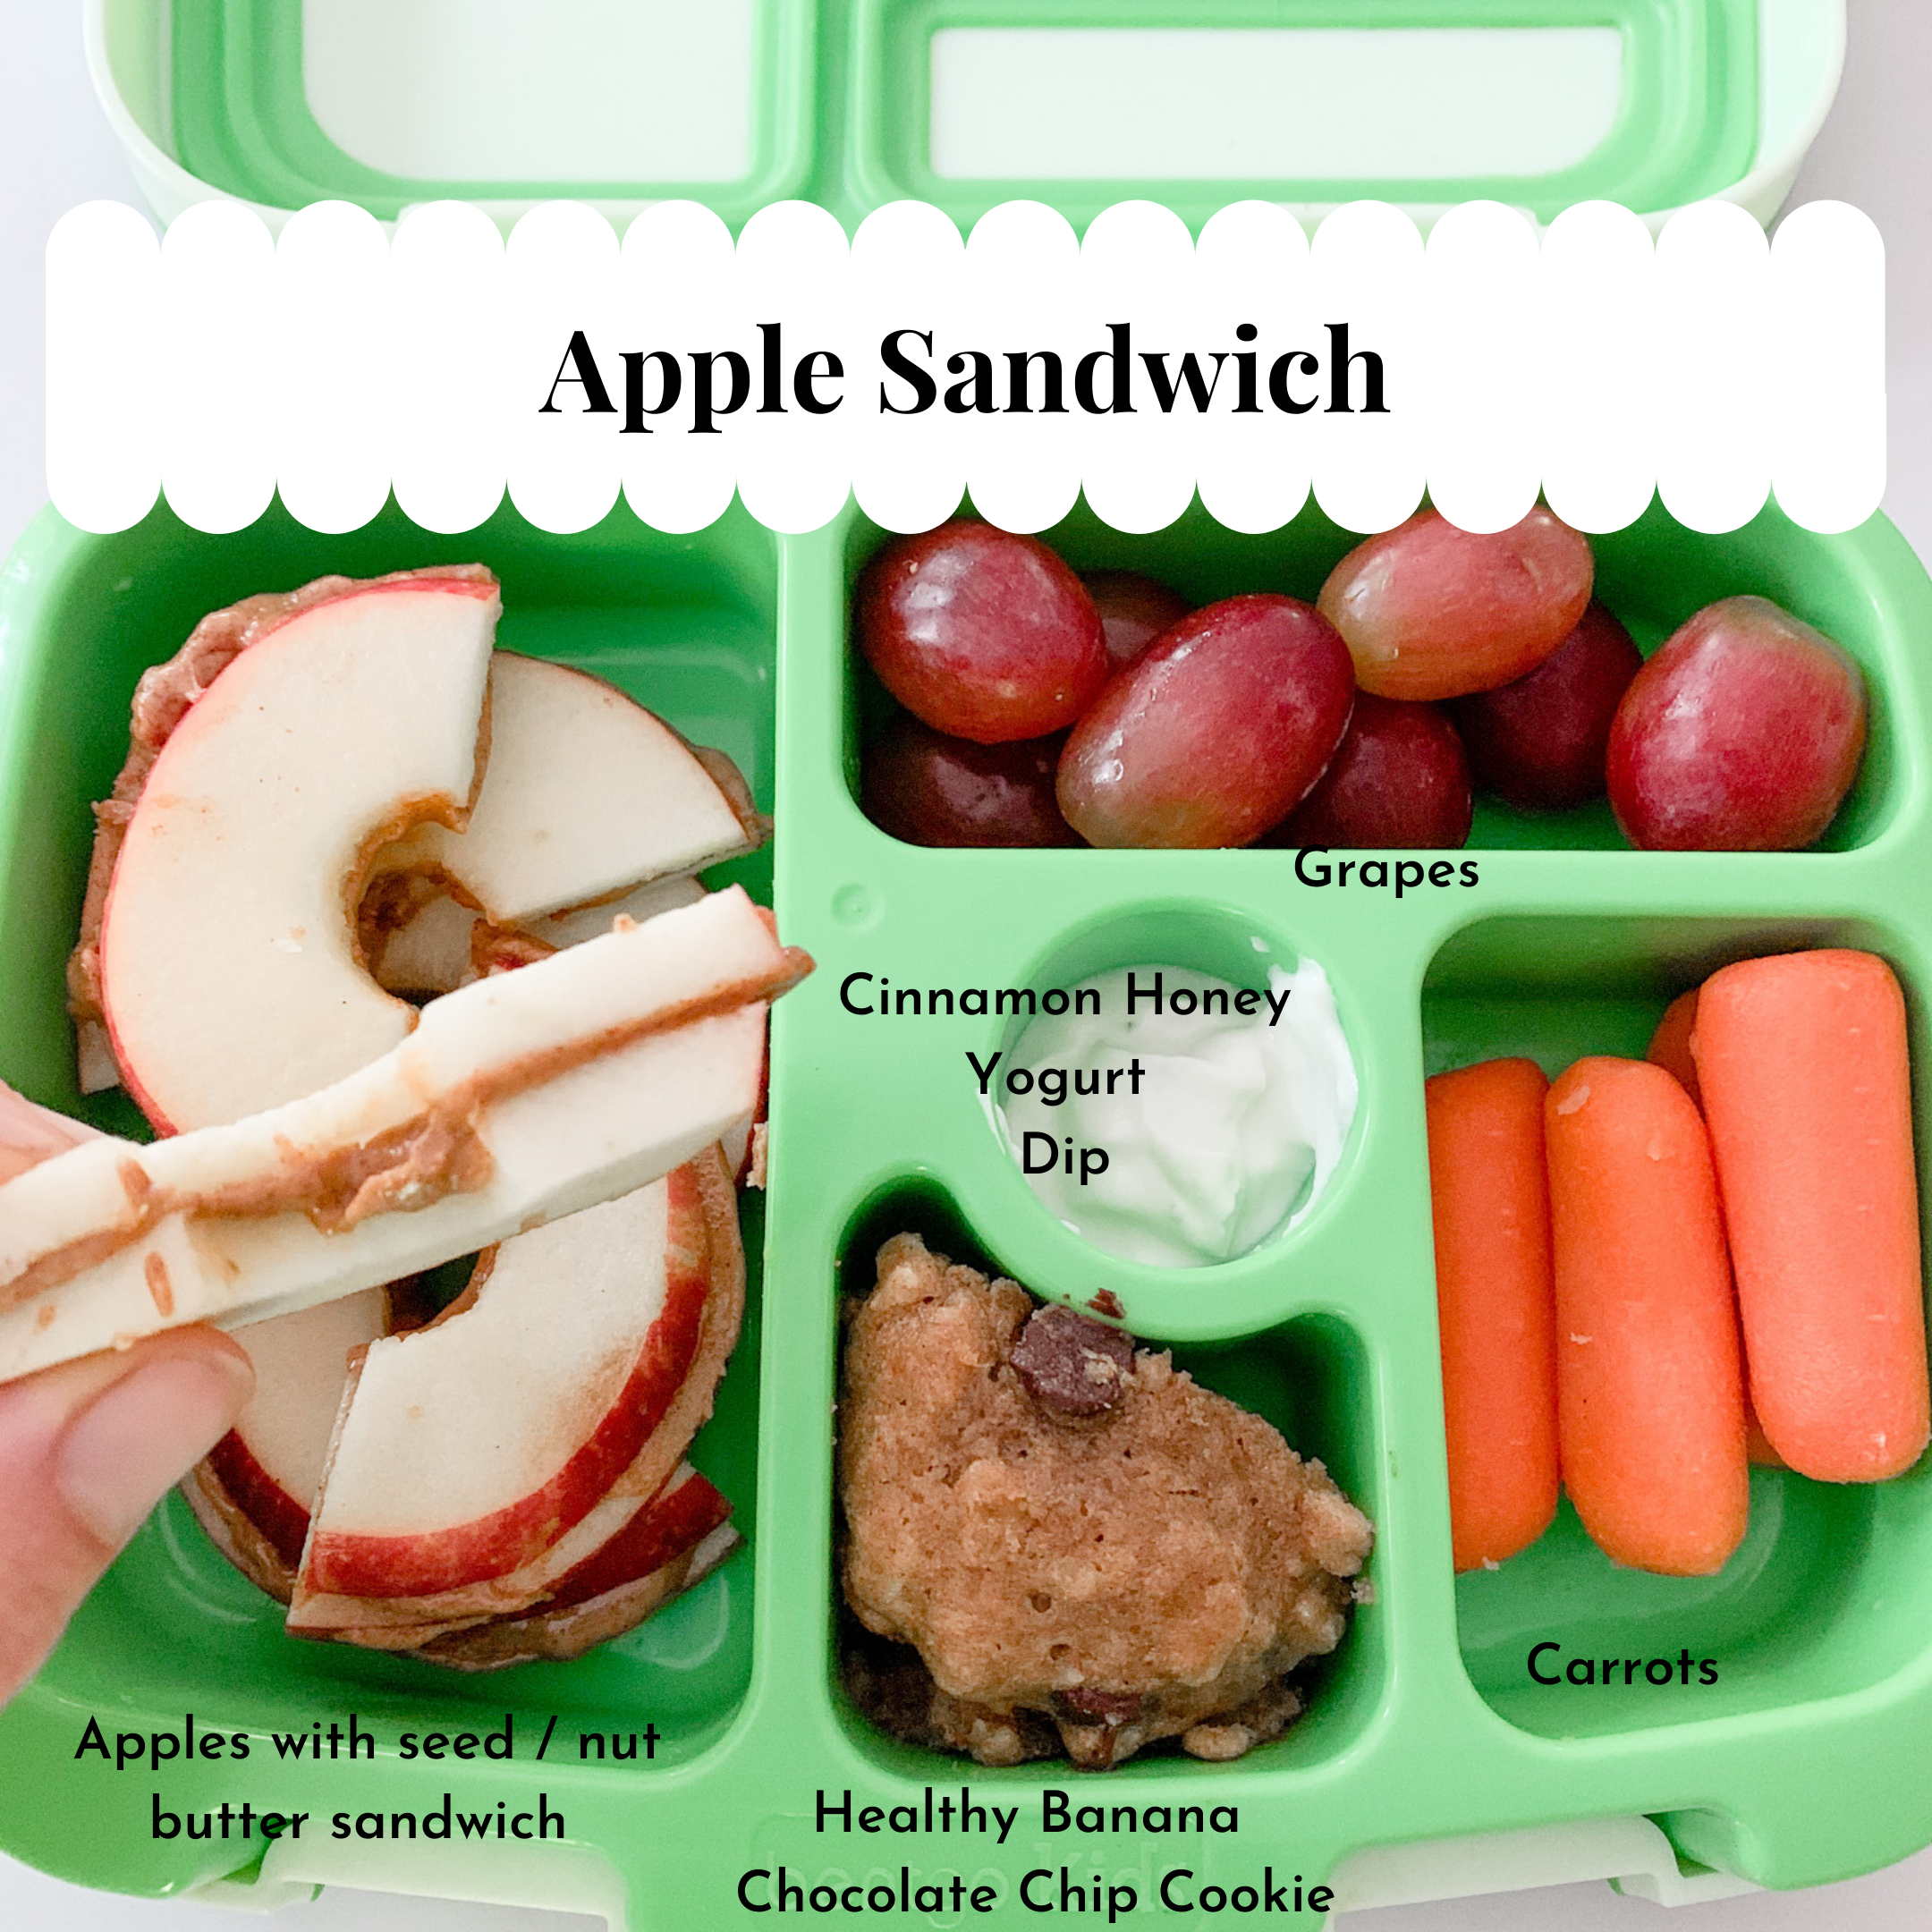 Healthy Lunch Ideas for Kids – Food Play Go